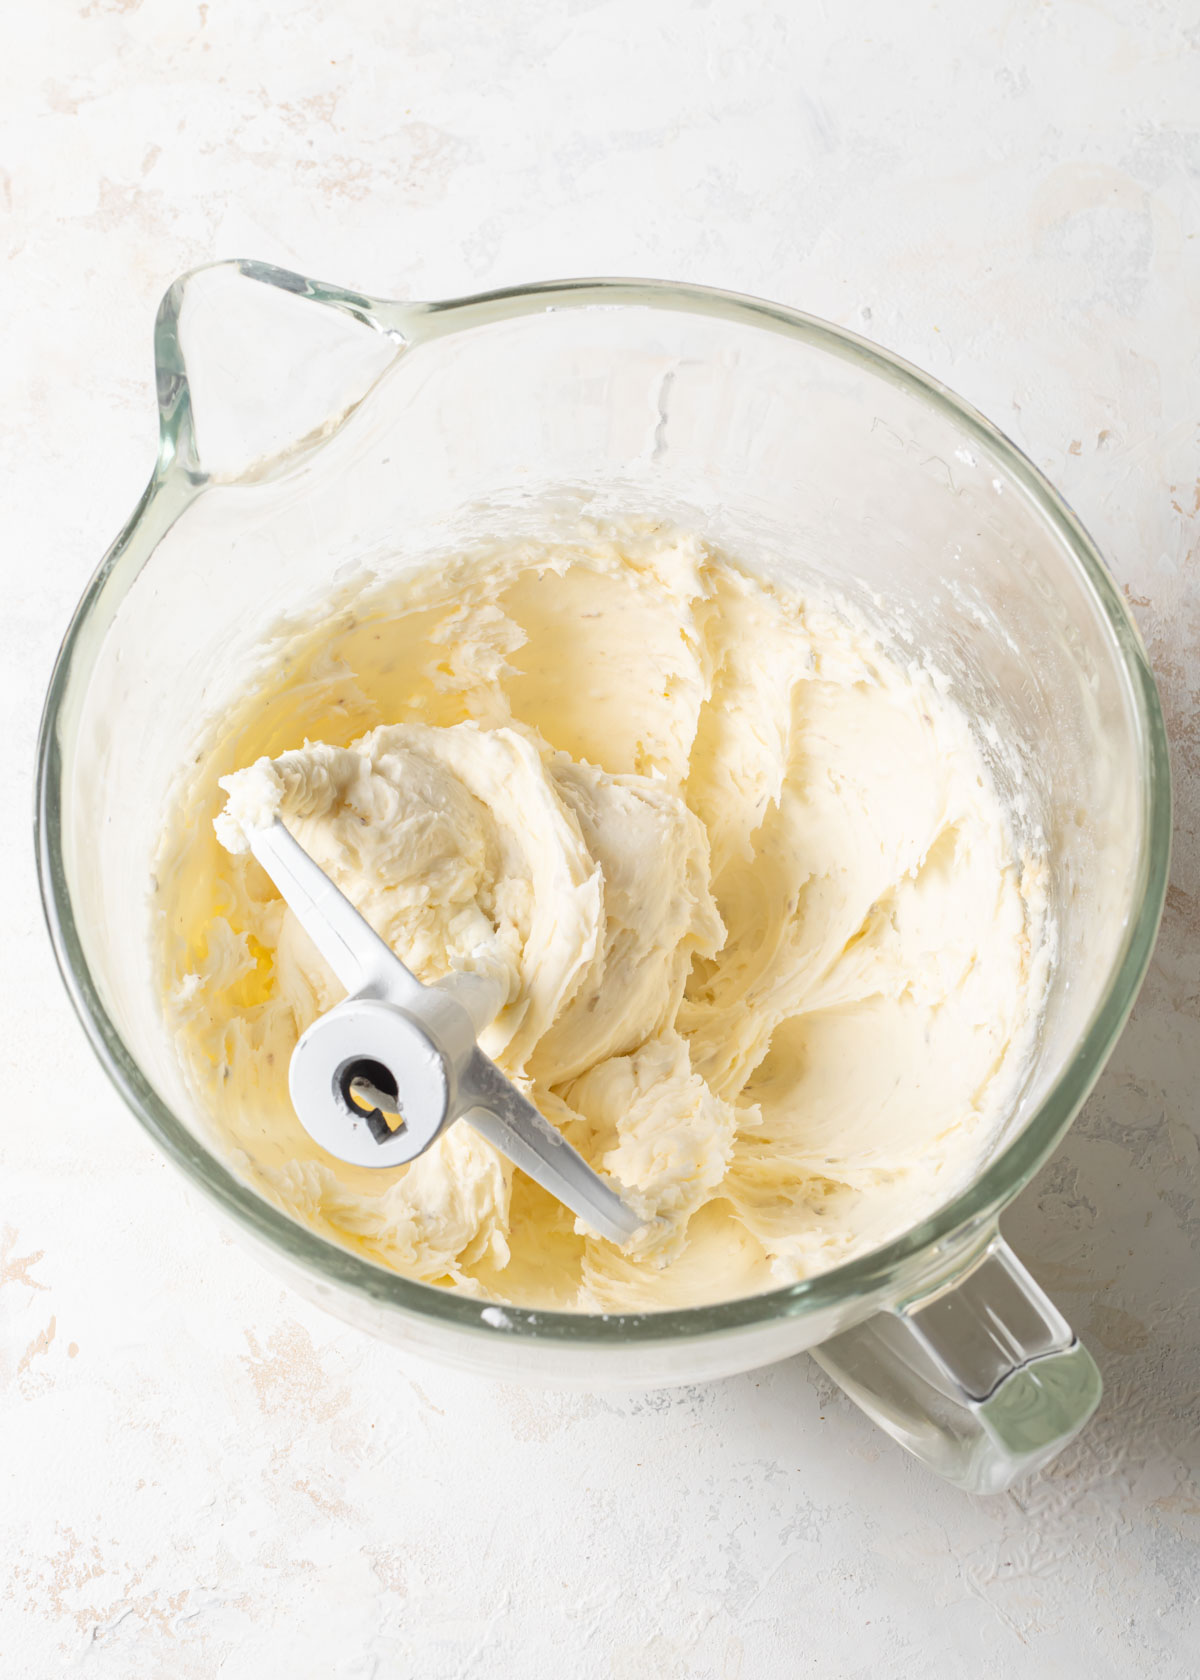 Mixing buttercream in a glass bowl